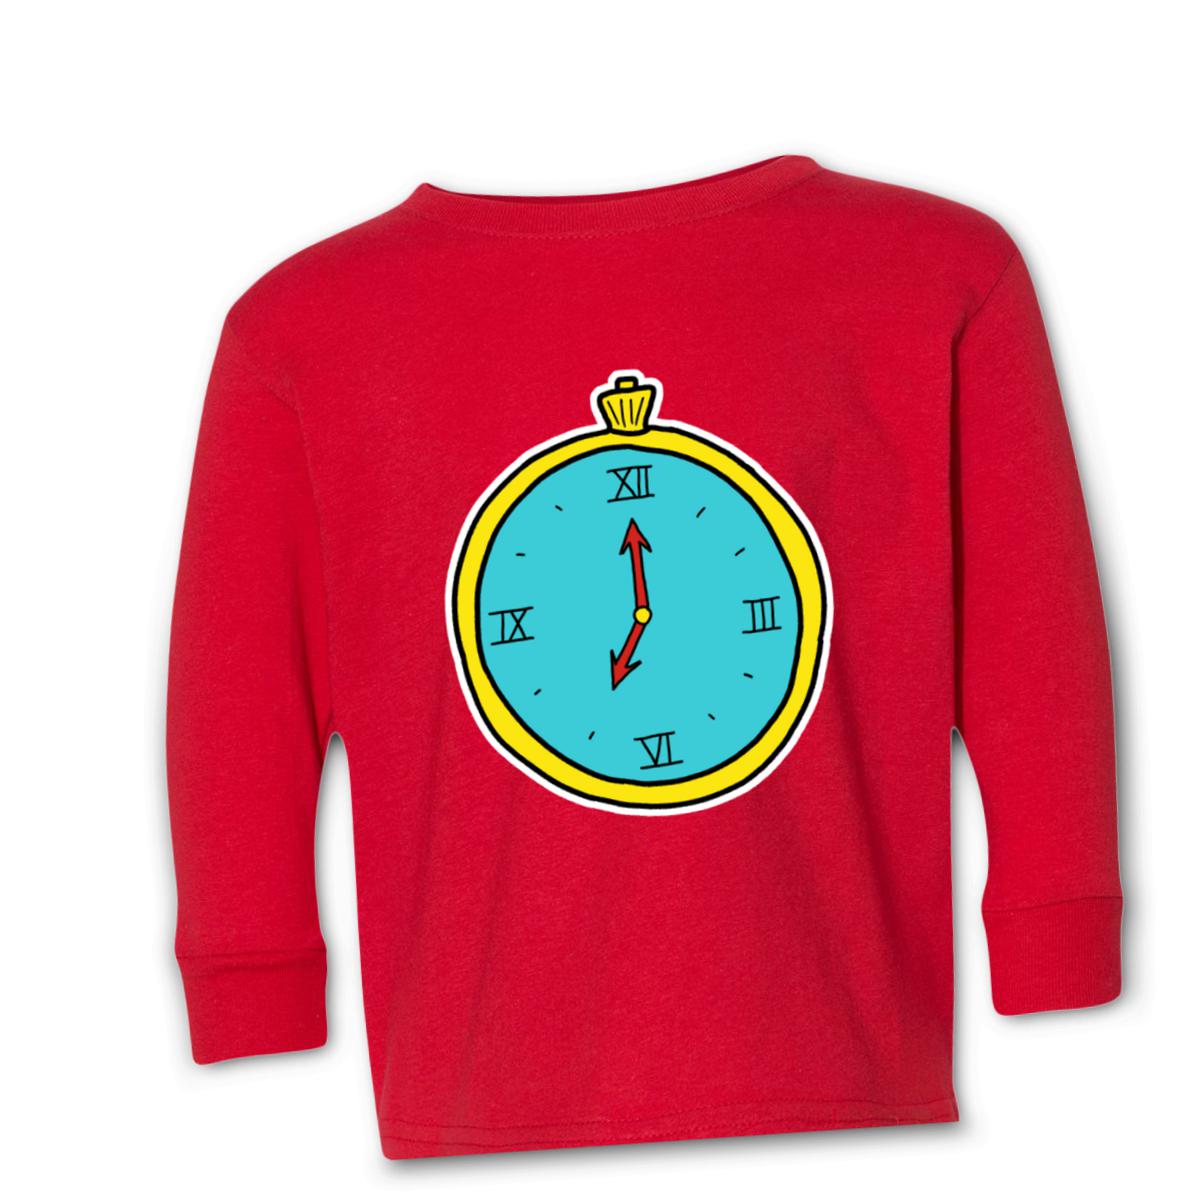 American Traditional Clock Toddler Long Sleeve Tee 2T red